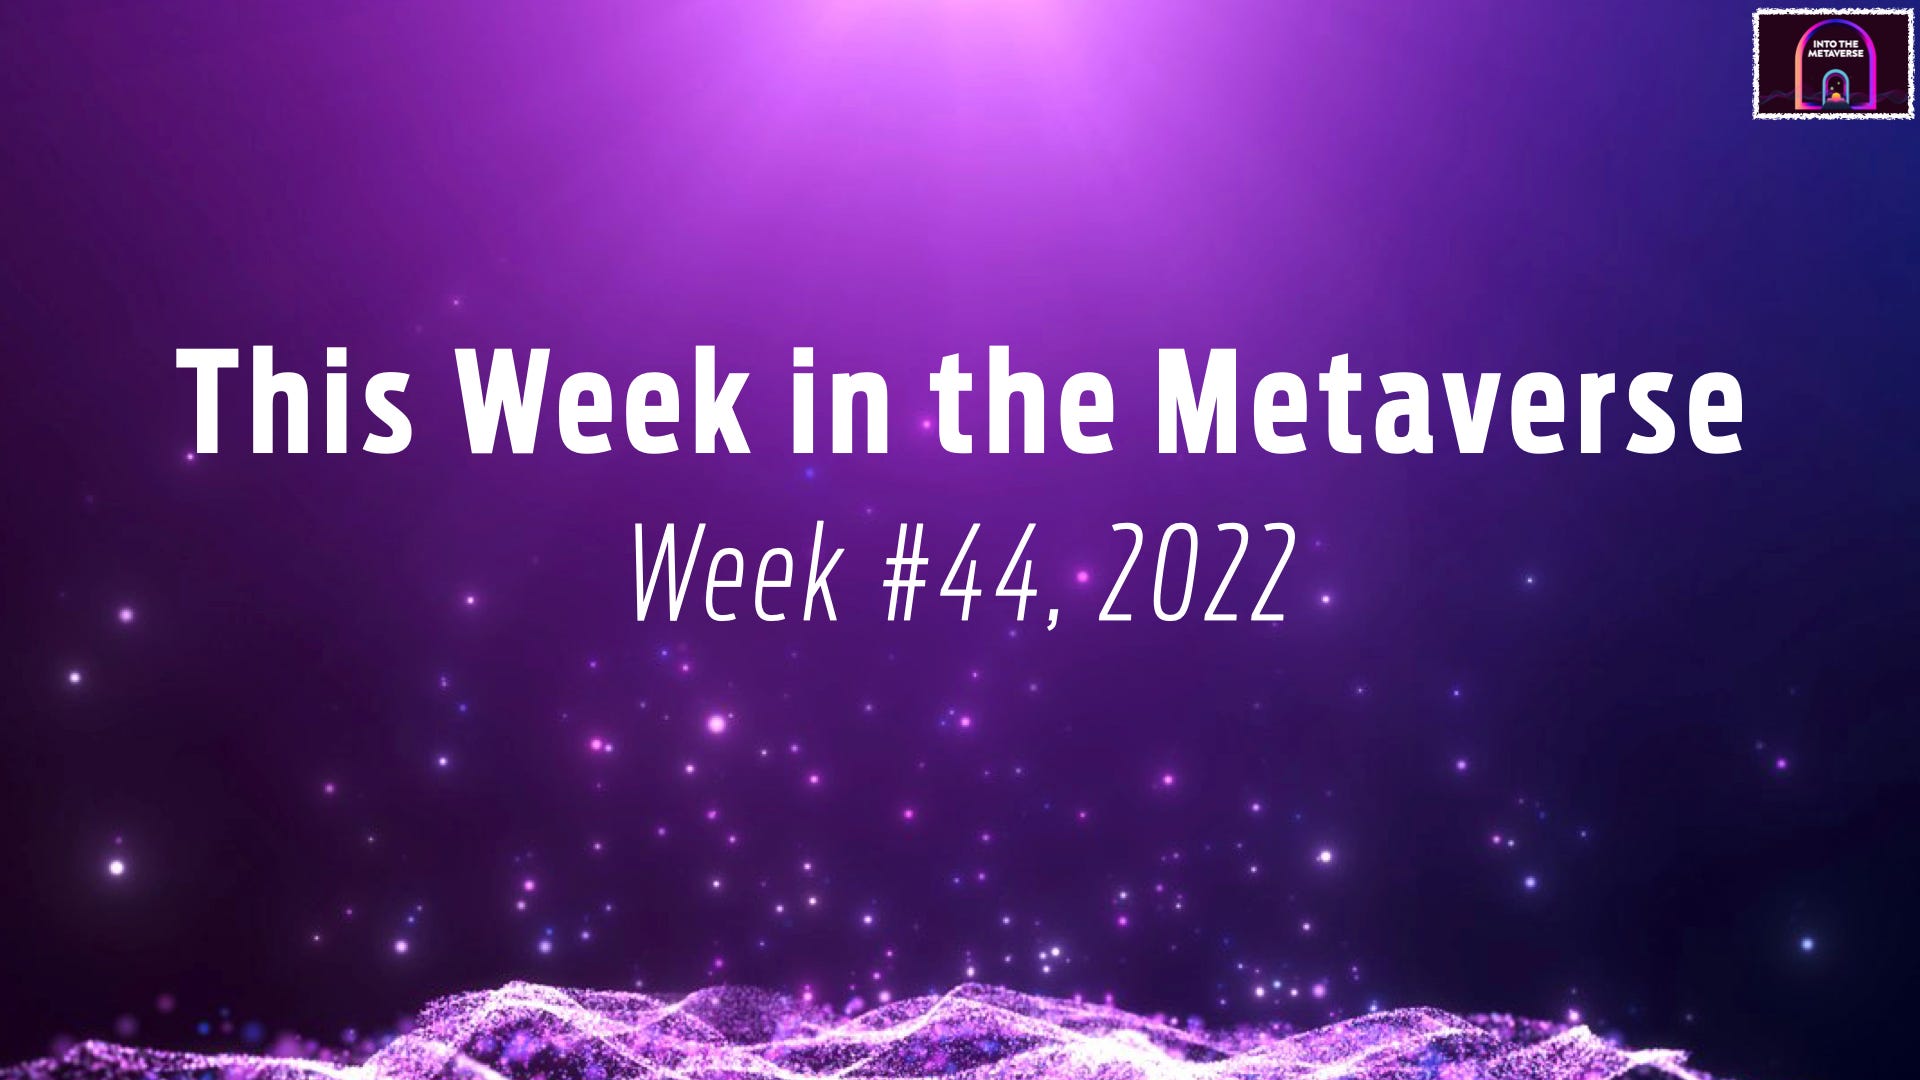 The Metaverse Explained: What Is It, and What's the Big Deal?